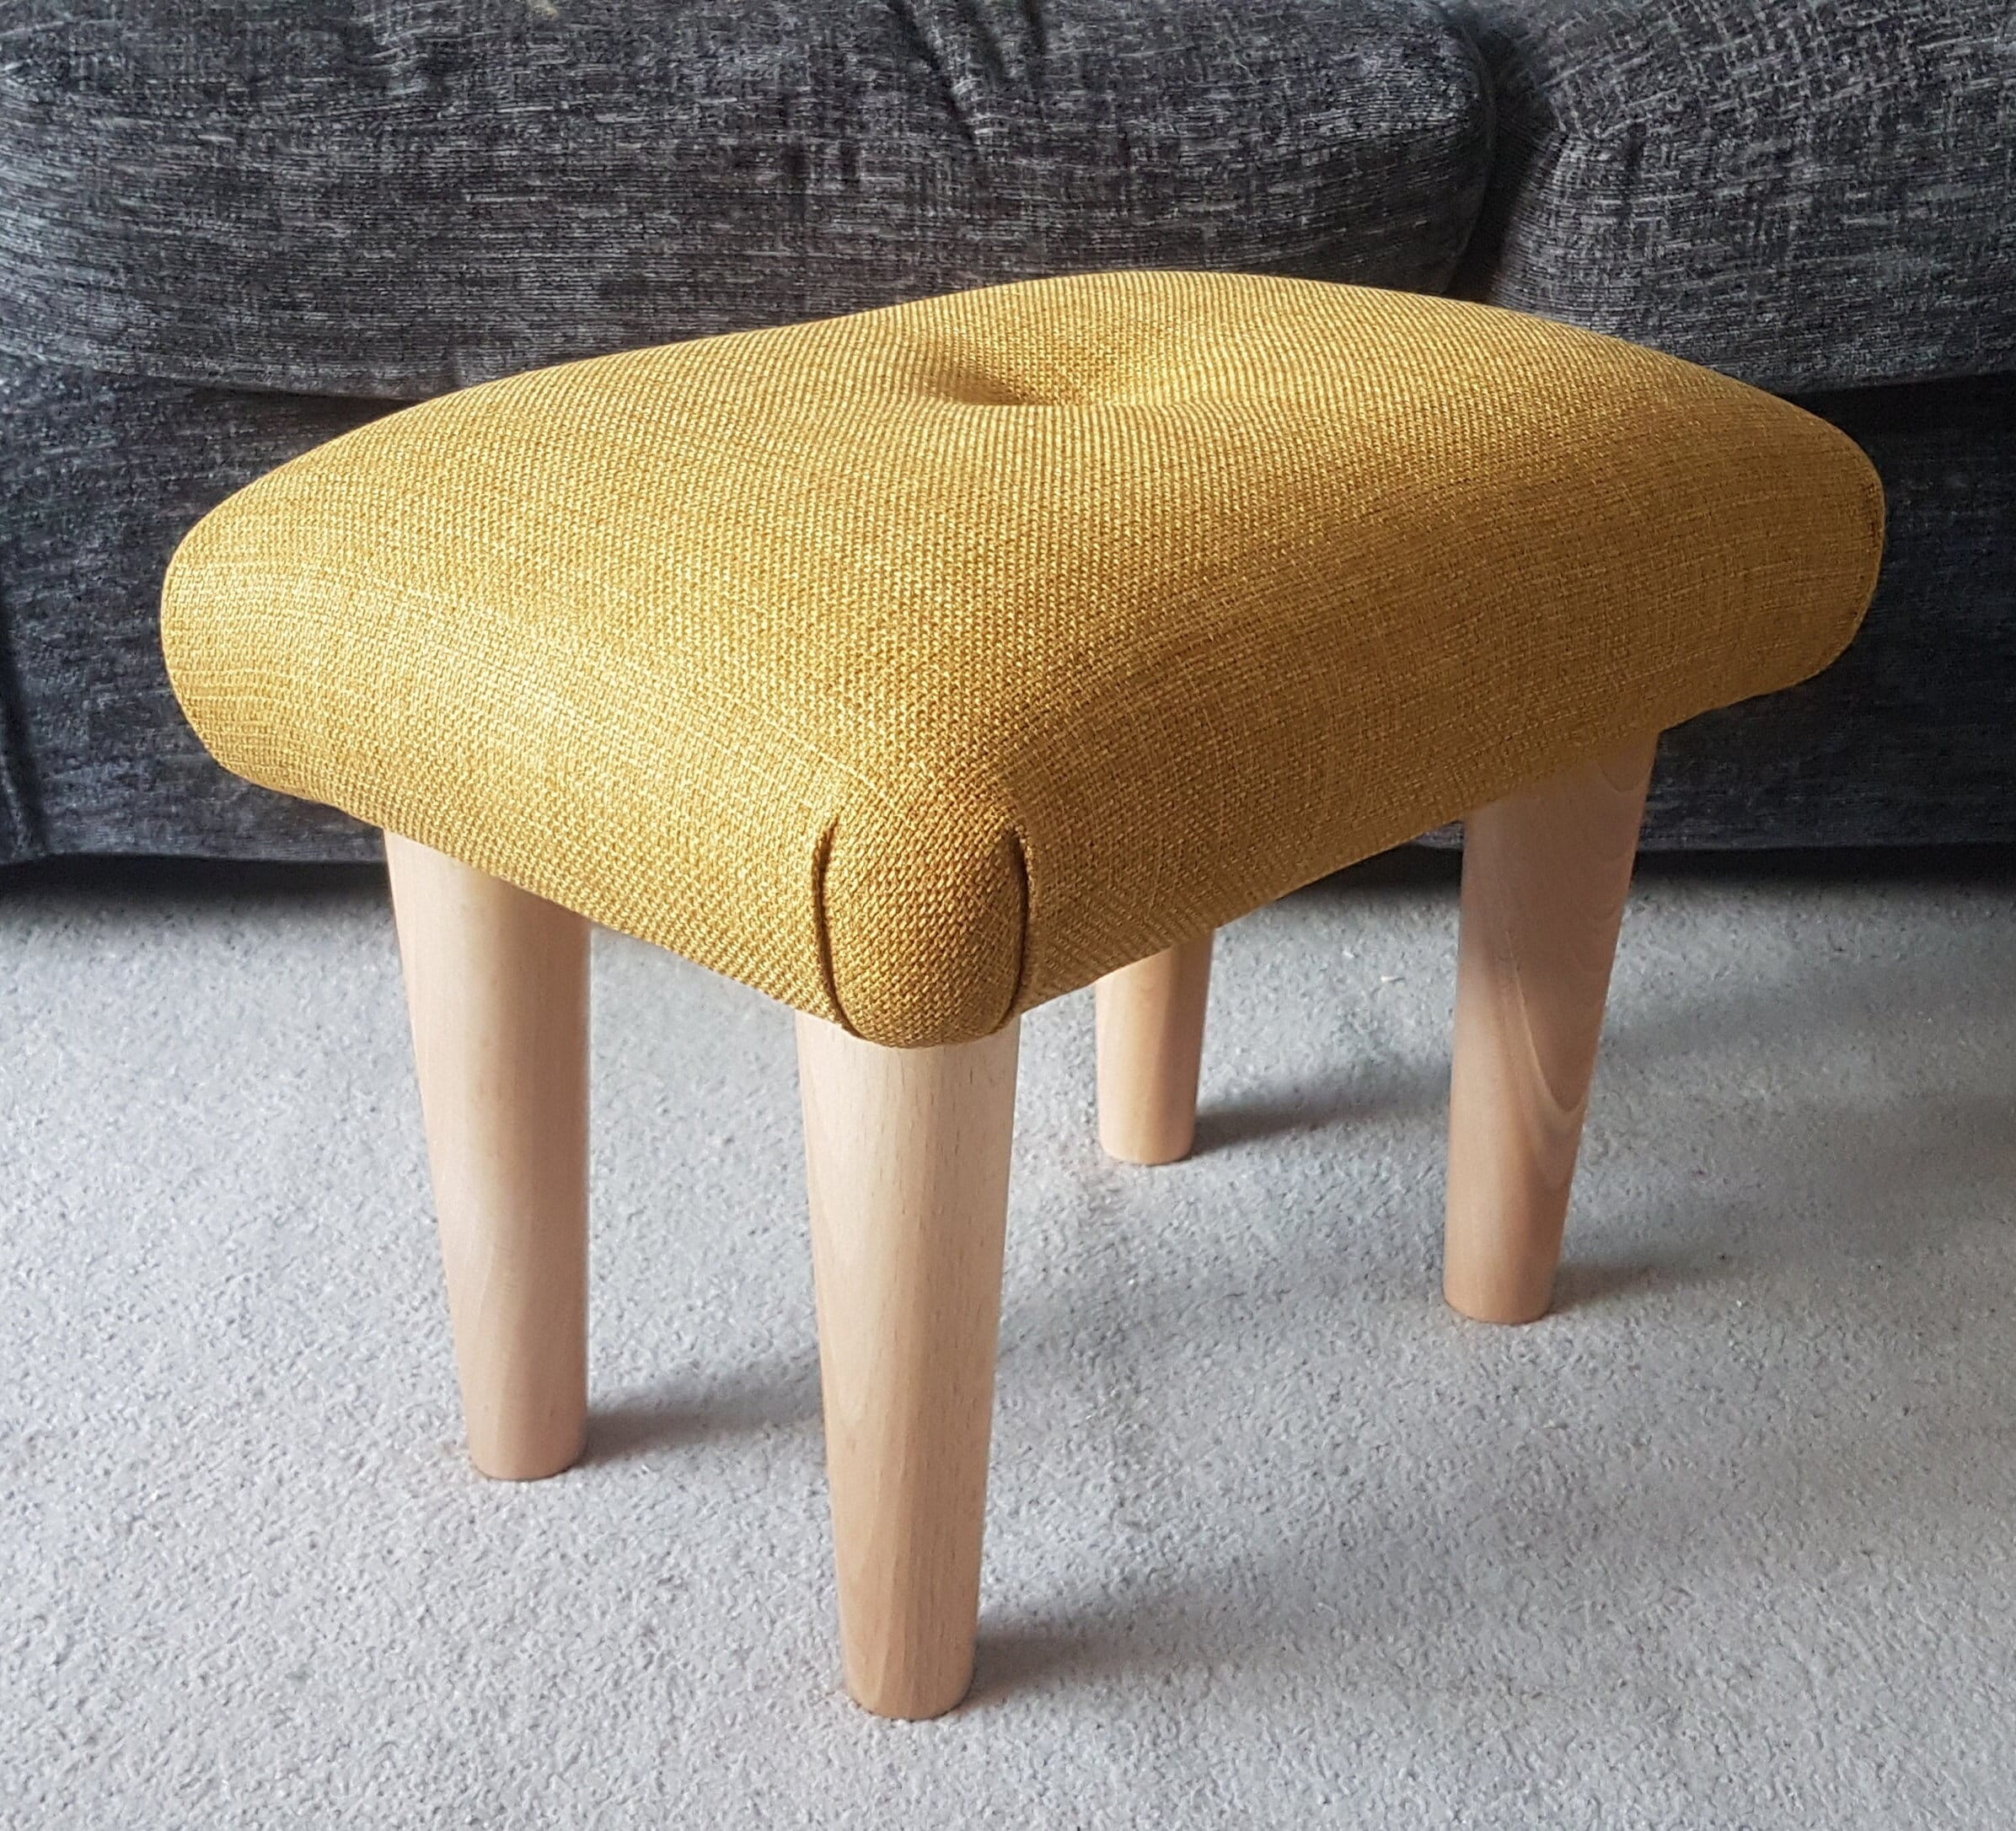 CHARCOAL Plain 19-29 Cm Tall Small Foot Stool With Wooden Legs